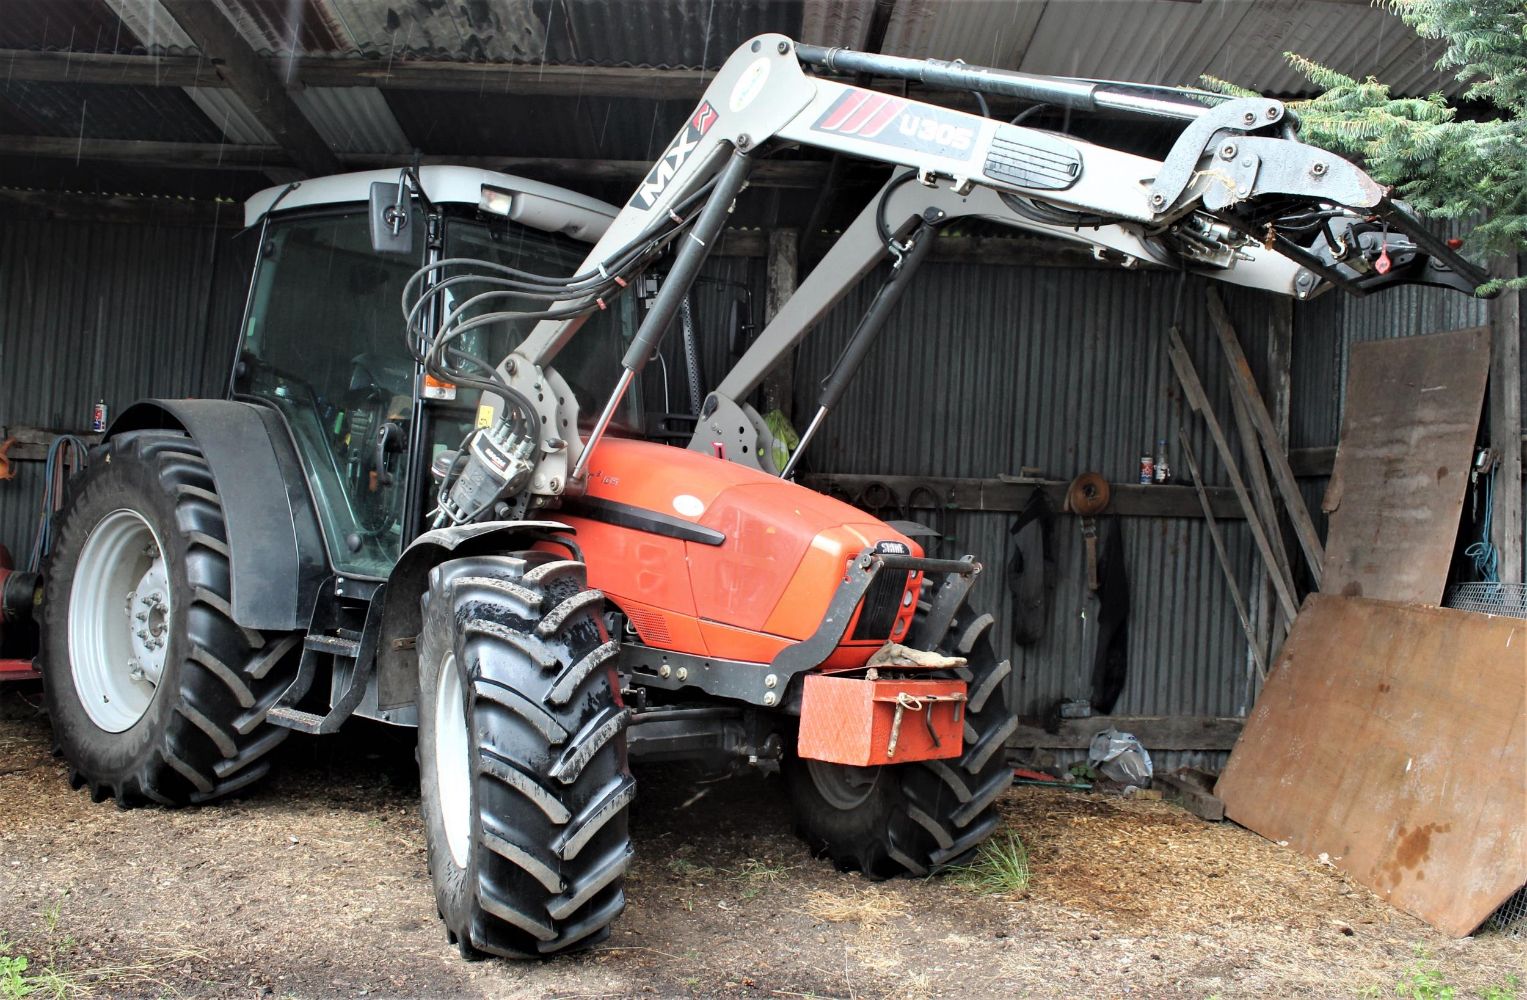 OFFSITE DISPERSAL AUCTION OF TRACTORS, FARM, MACHINERY IMPLEMENTS, TOOLS ETC AT SANDYCROFT FARM, NORLEY, FRODSHAM, CHESHIRE, WA6 8JN -NO VAT